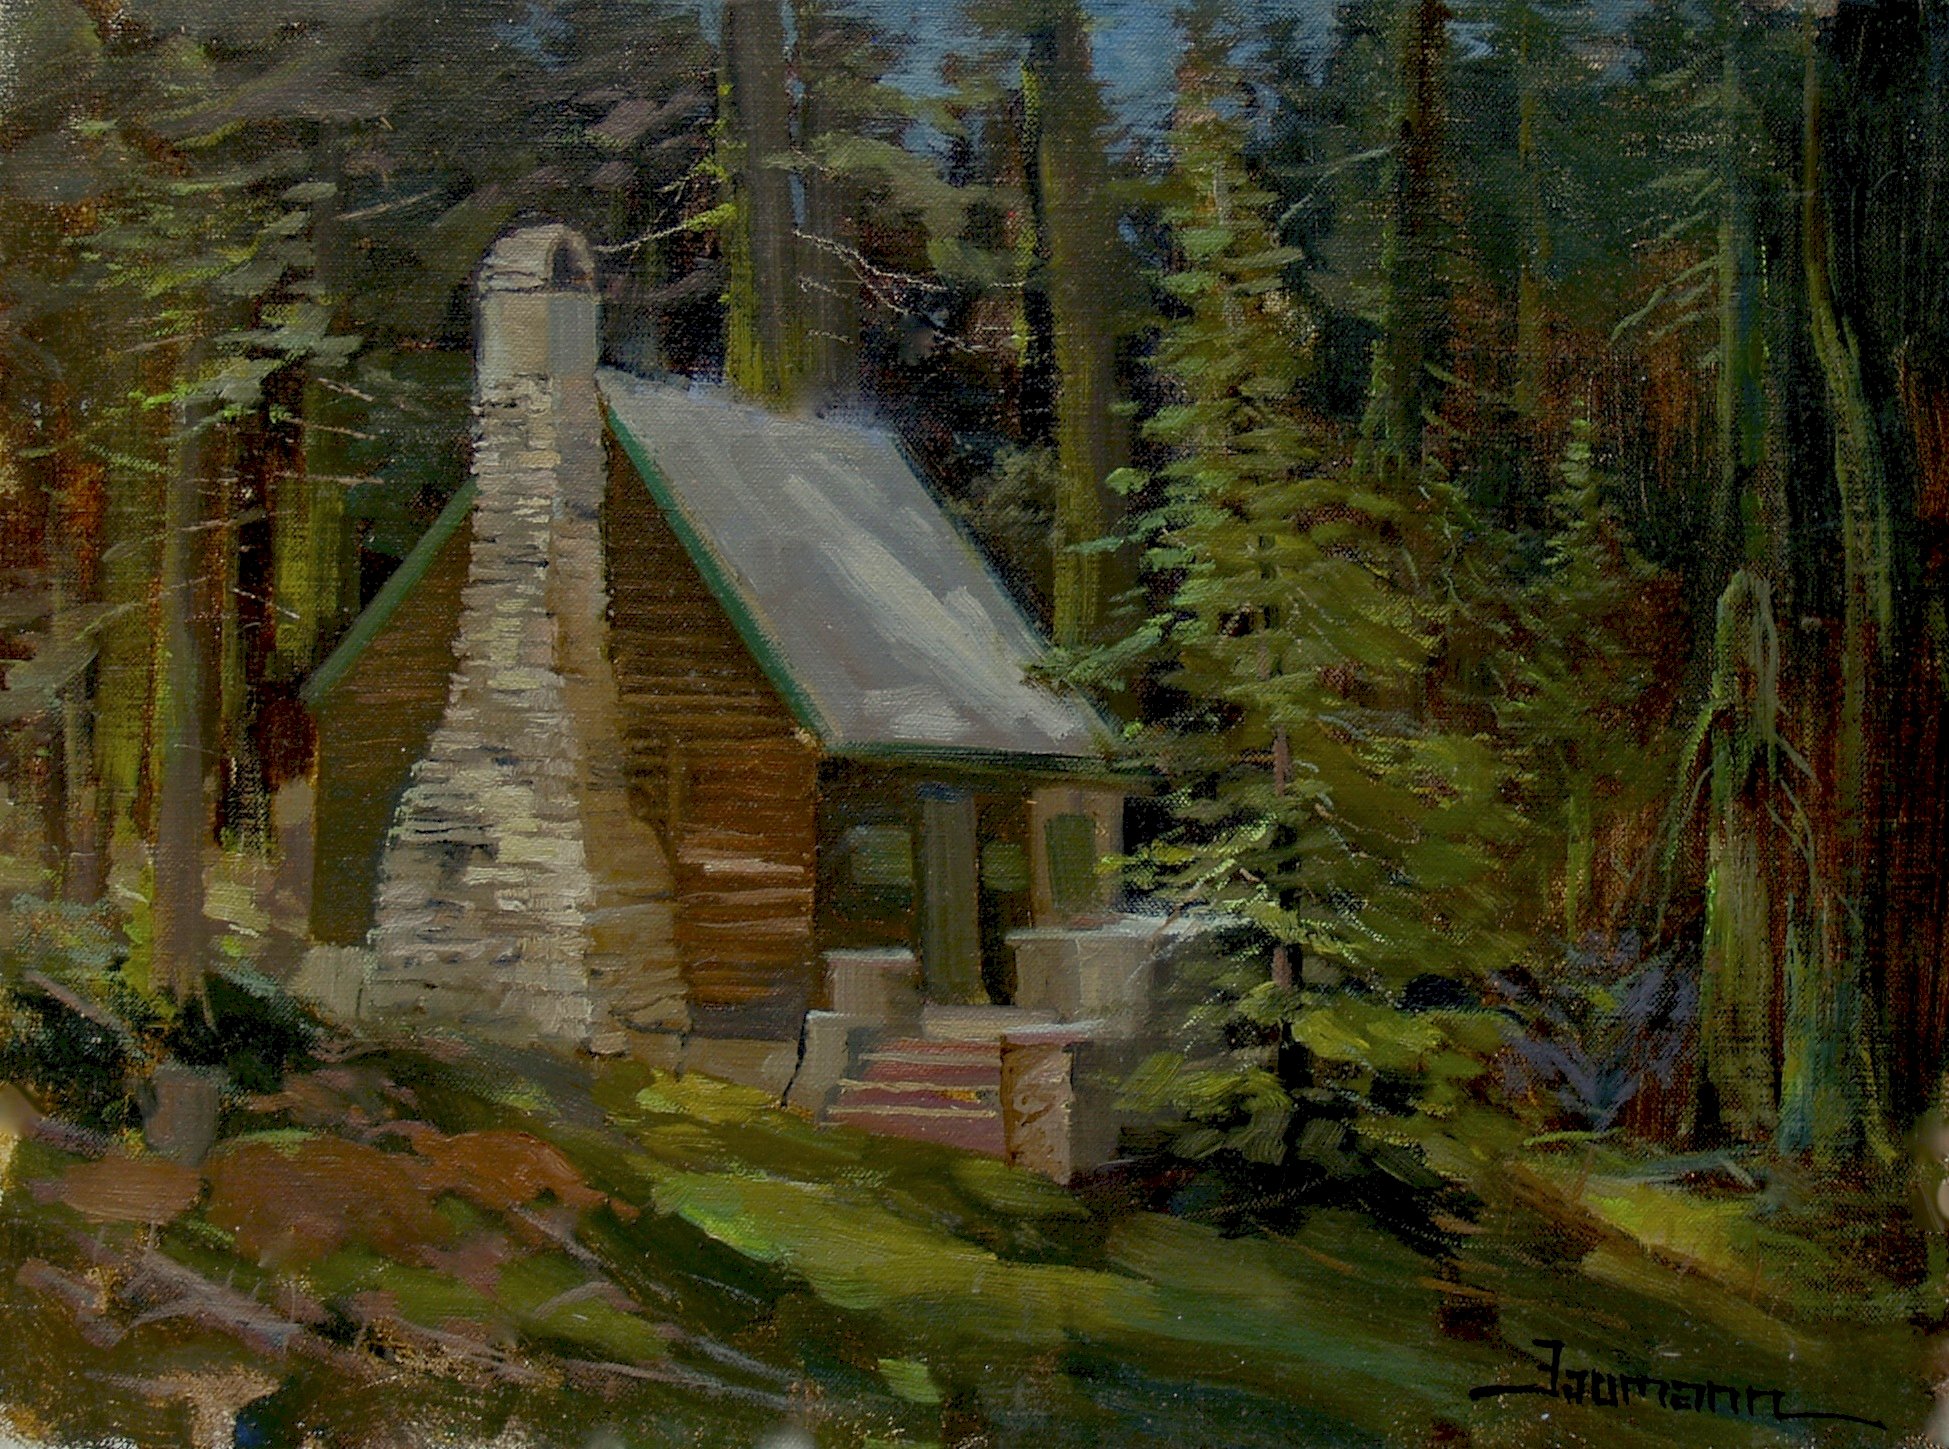 Echo Lake Painting:  The Artist’s Cabin